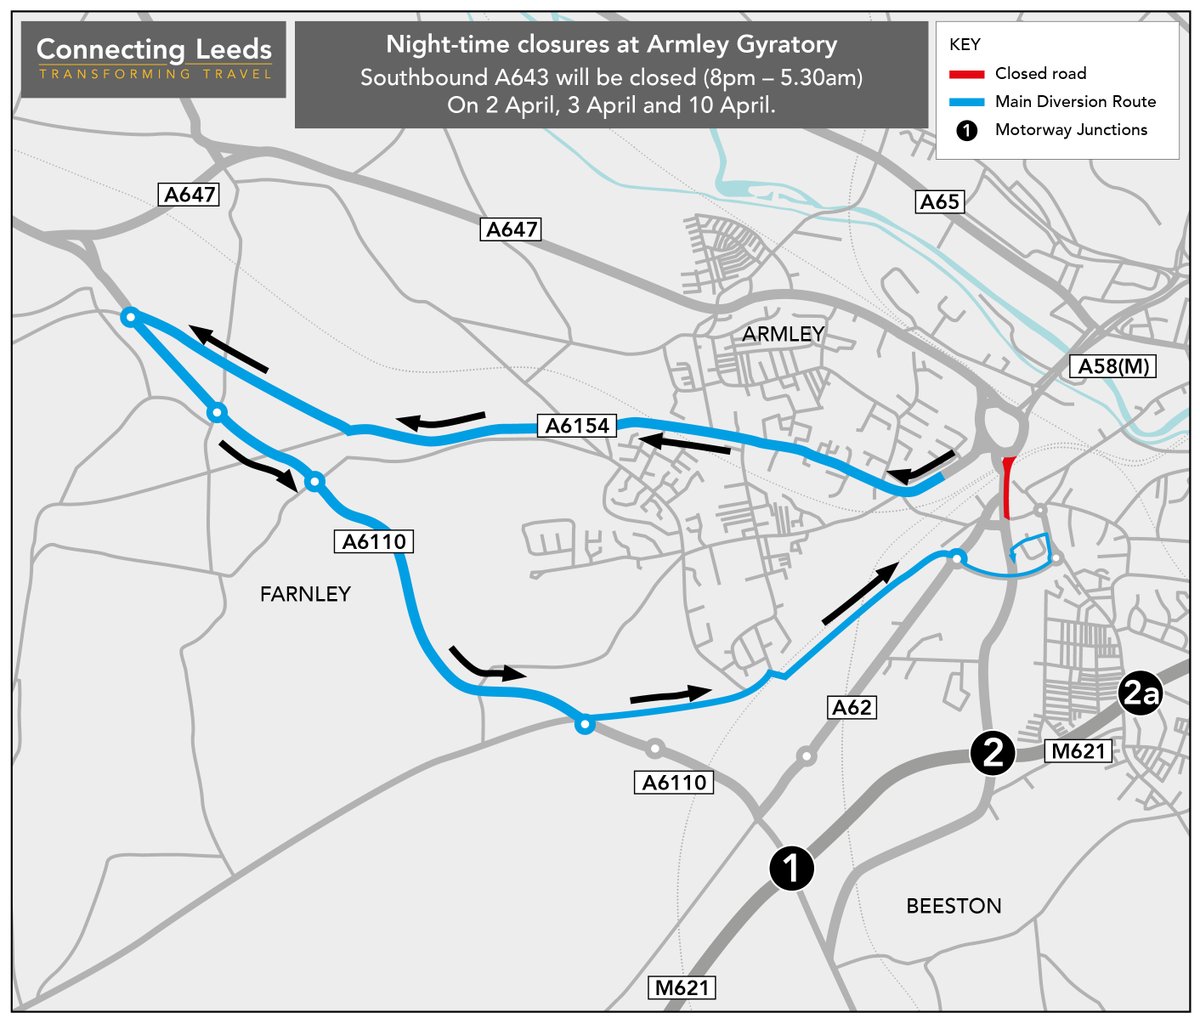 ⚠️ Reminder: night-time closures at Armley Gyratory this evening (10 April). 📅 Southbound A643 will be closed between 8pm – 5.30am to carry out final works to the Gelderd Road footbridge. ↩️ Diversions will be in place and signposted. Find out more: orlo.uk/Ob4Df